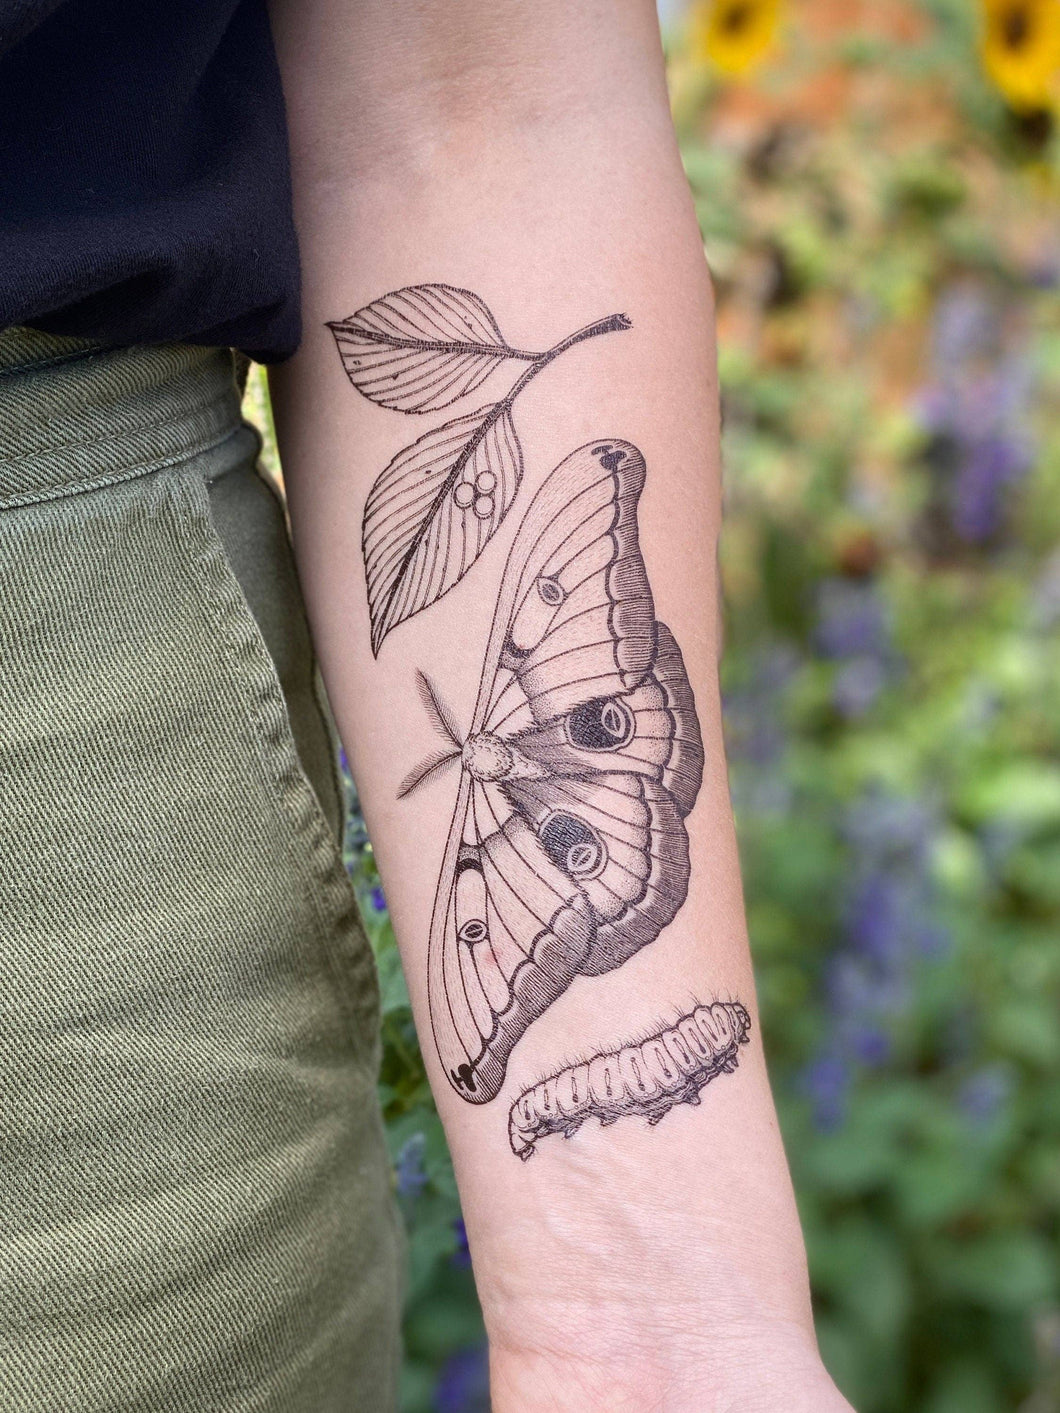 Express yourself with this fun nature-themed temporary tattoo.  The polyphemus moth is a silk moth; the caterpillar munches on several different tree species then pupates in a silk cocoon, and finally emerges as a huge 4-6 inch wide golden brown moth with a furry body and antennae. Measures 6.25 by 2.5 inches with black lines and stippling.   Made in Austin, TX USA